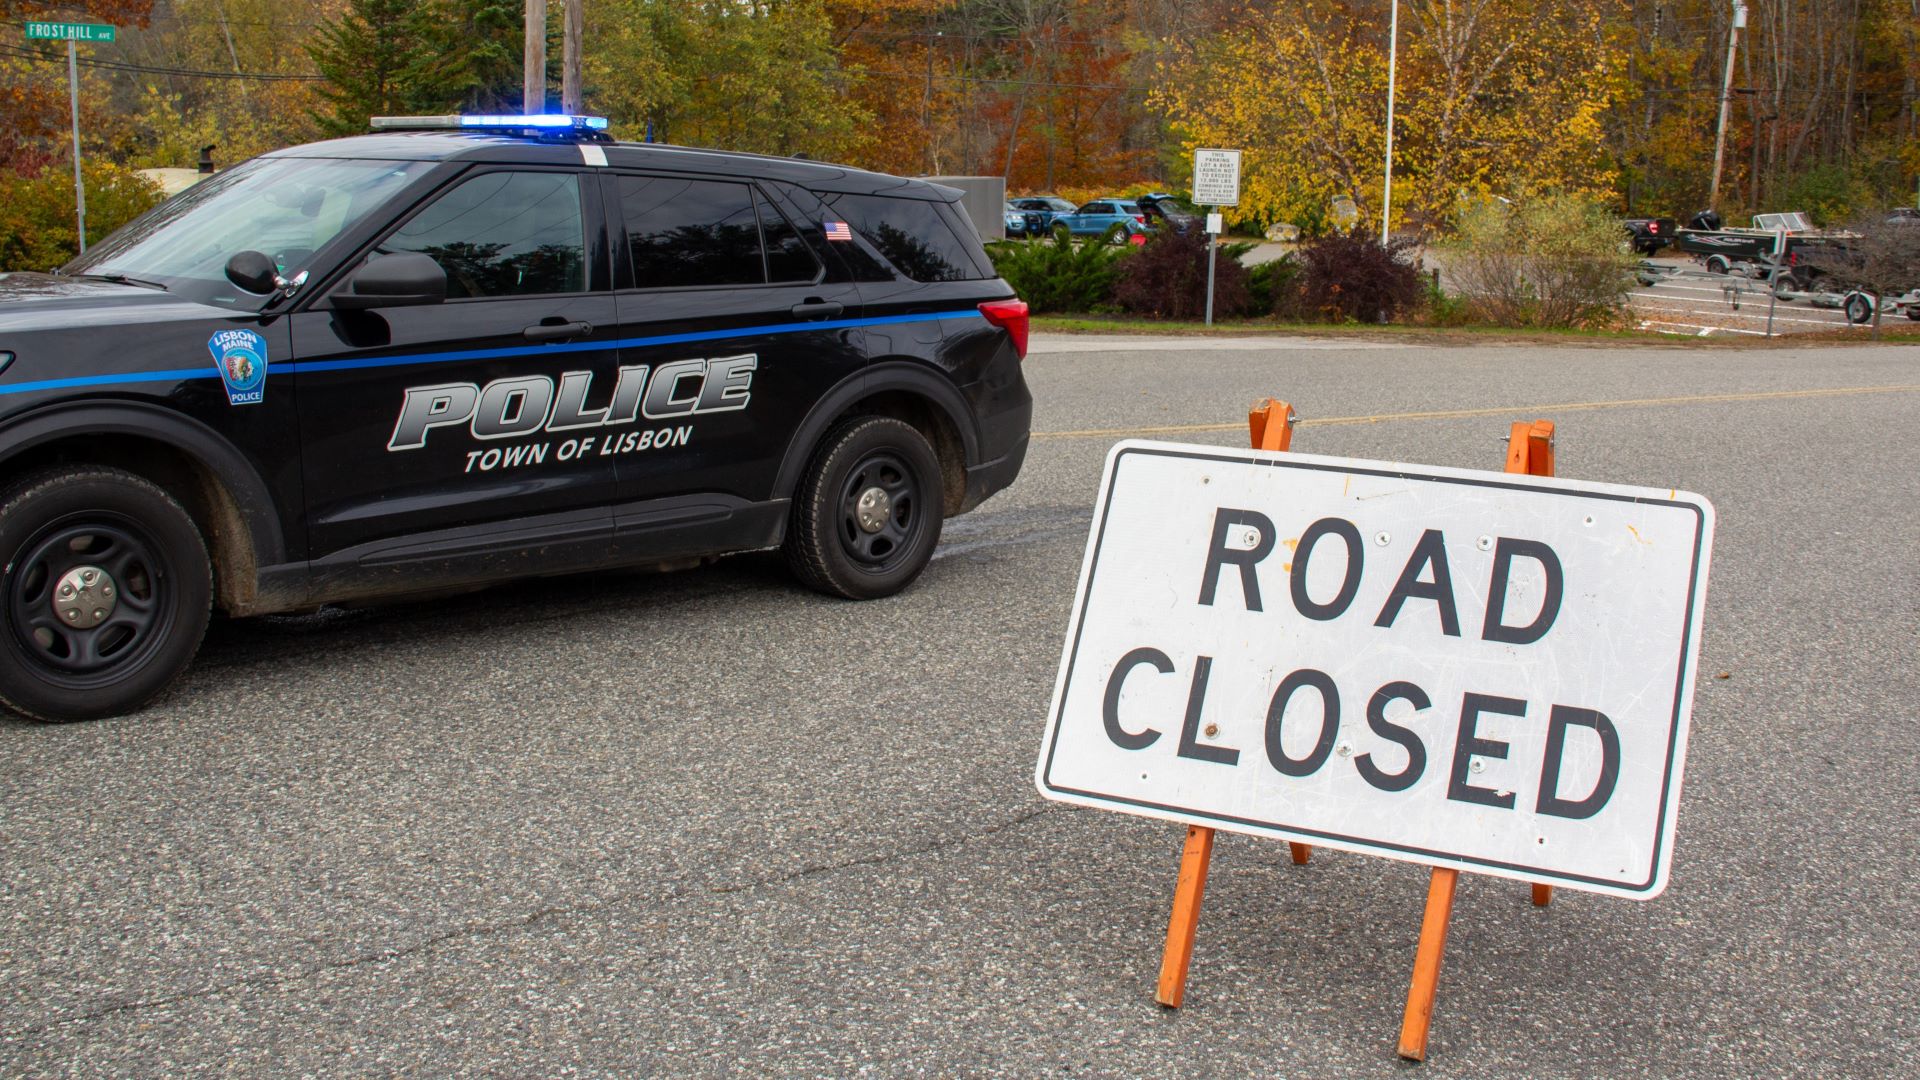 A Town of Lisbon police cruiser next to a road closure sign.